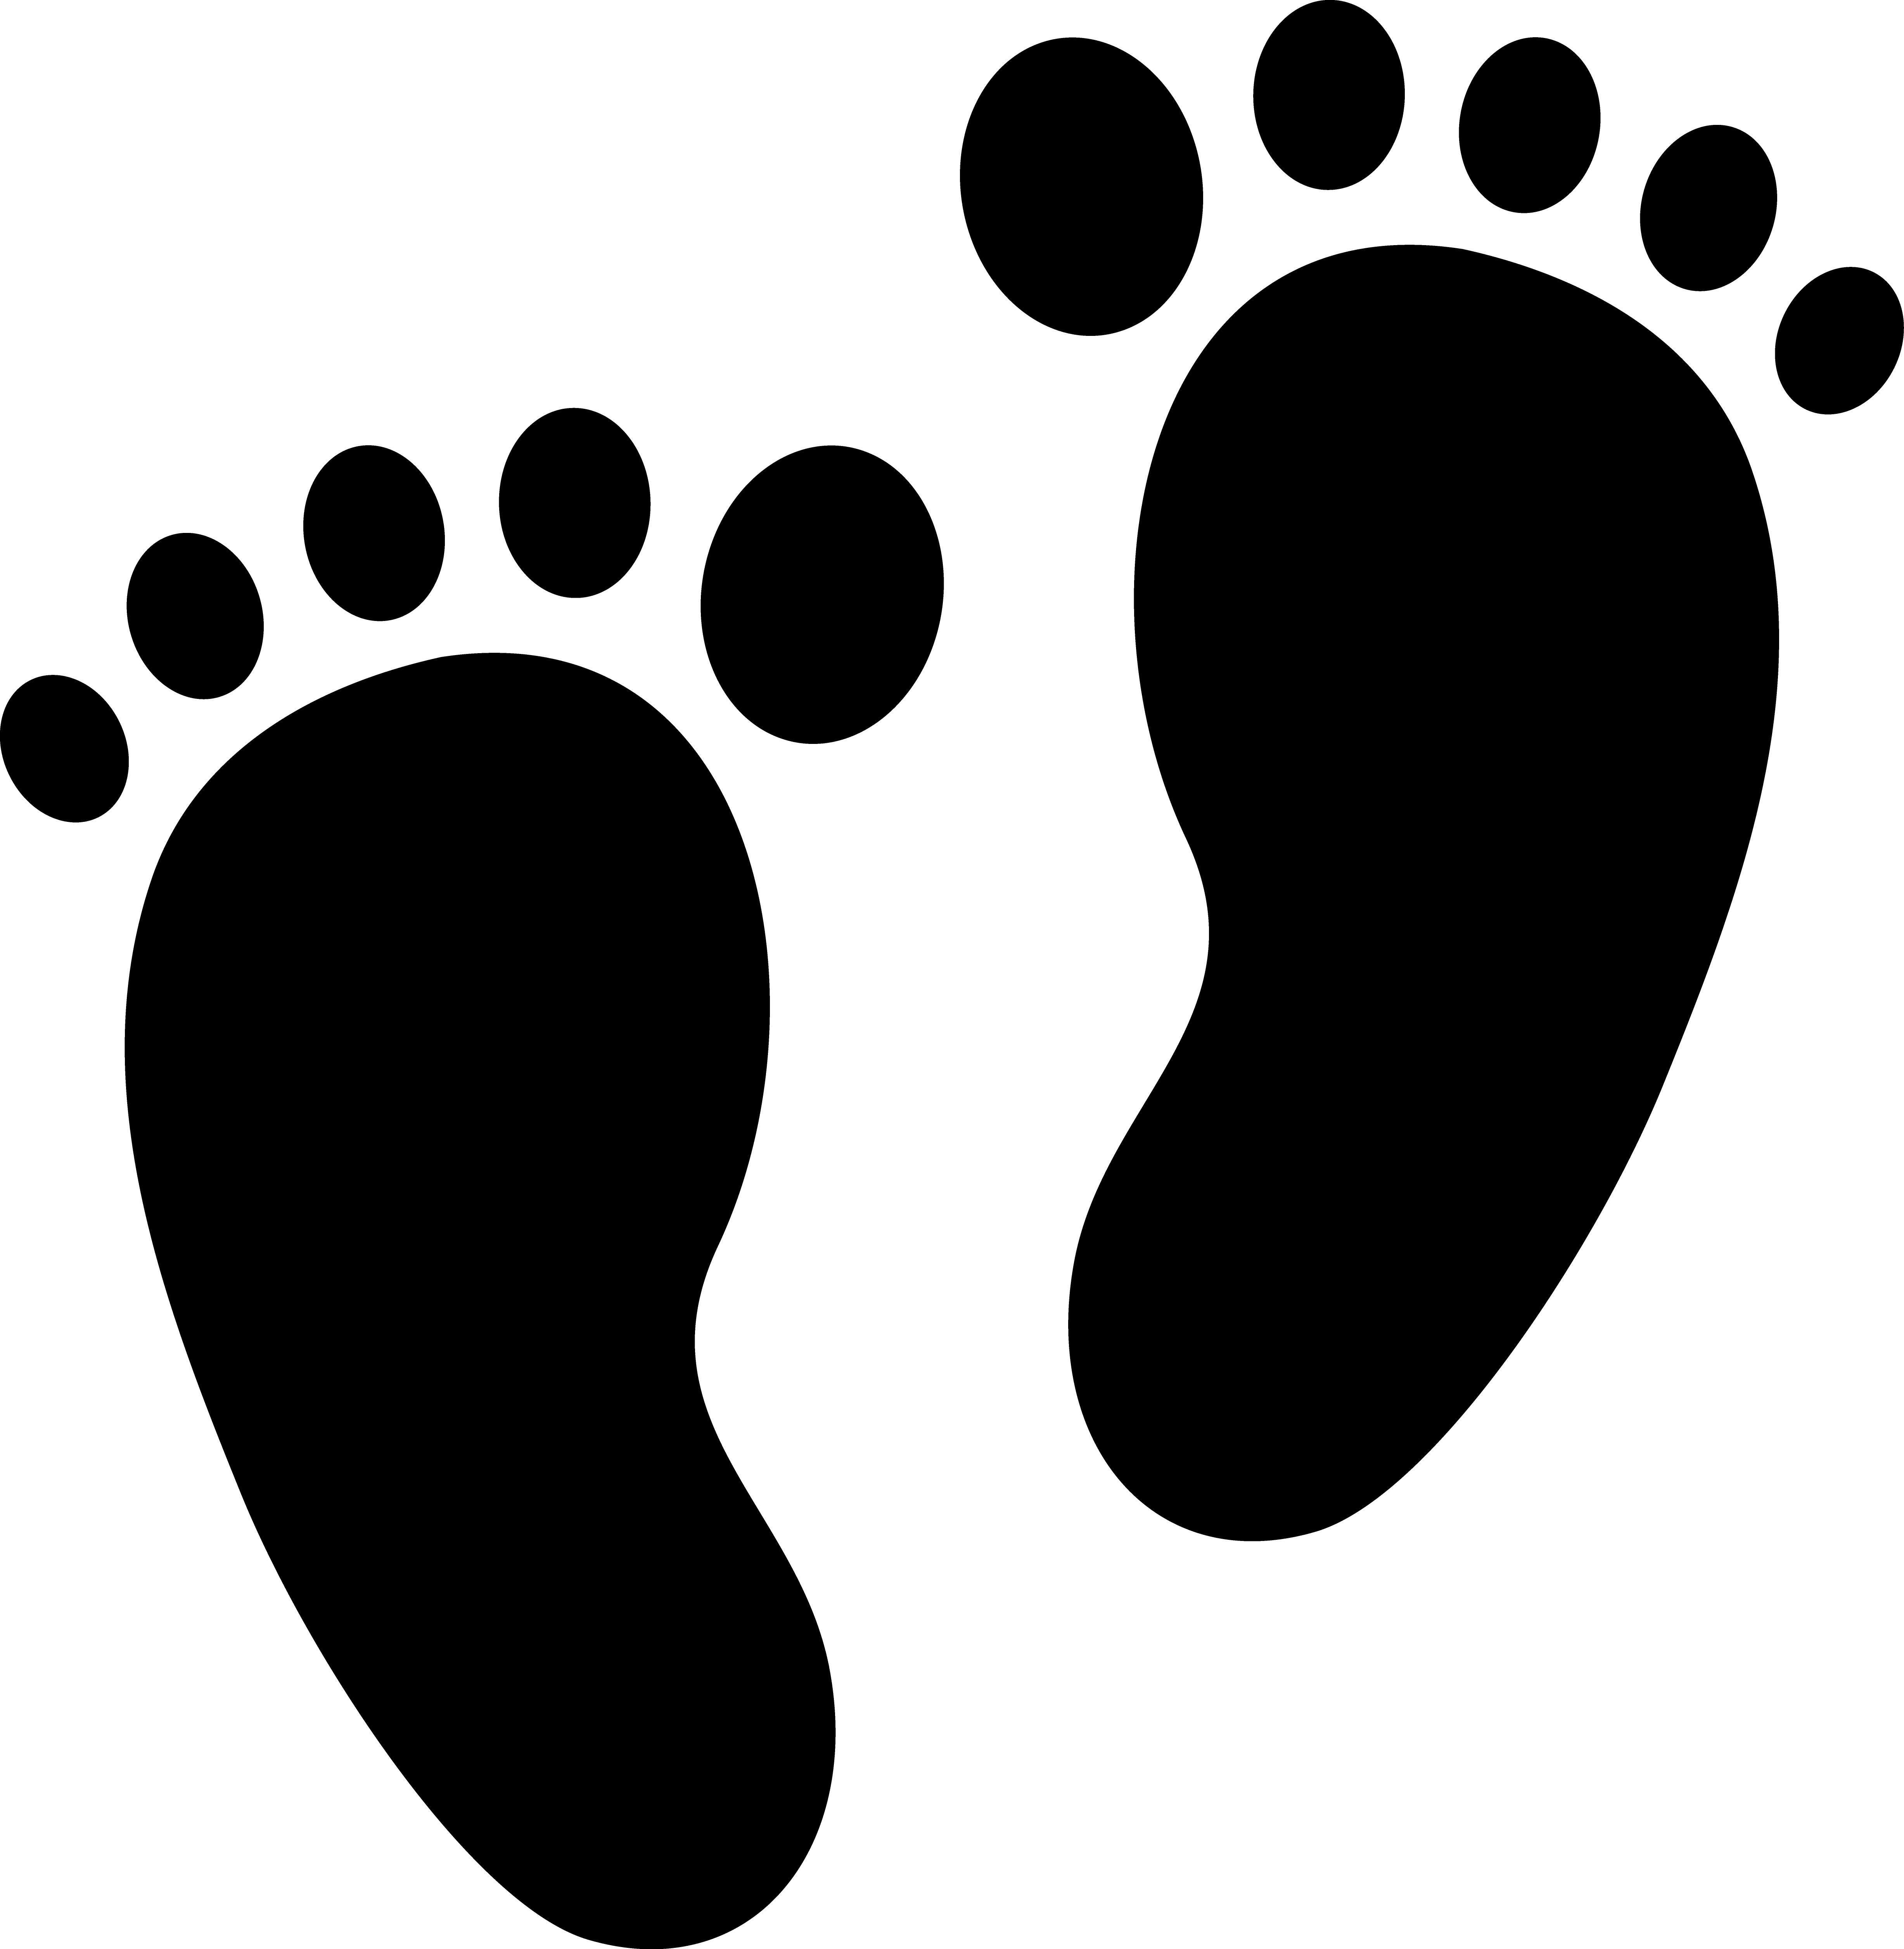 Silhouettes footprints design baby. Footsteps clipart far away